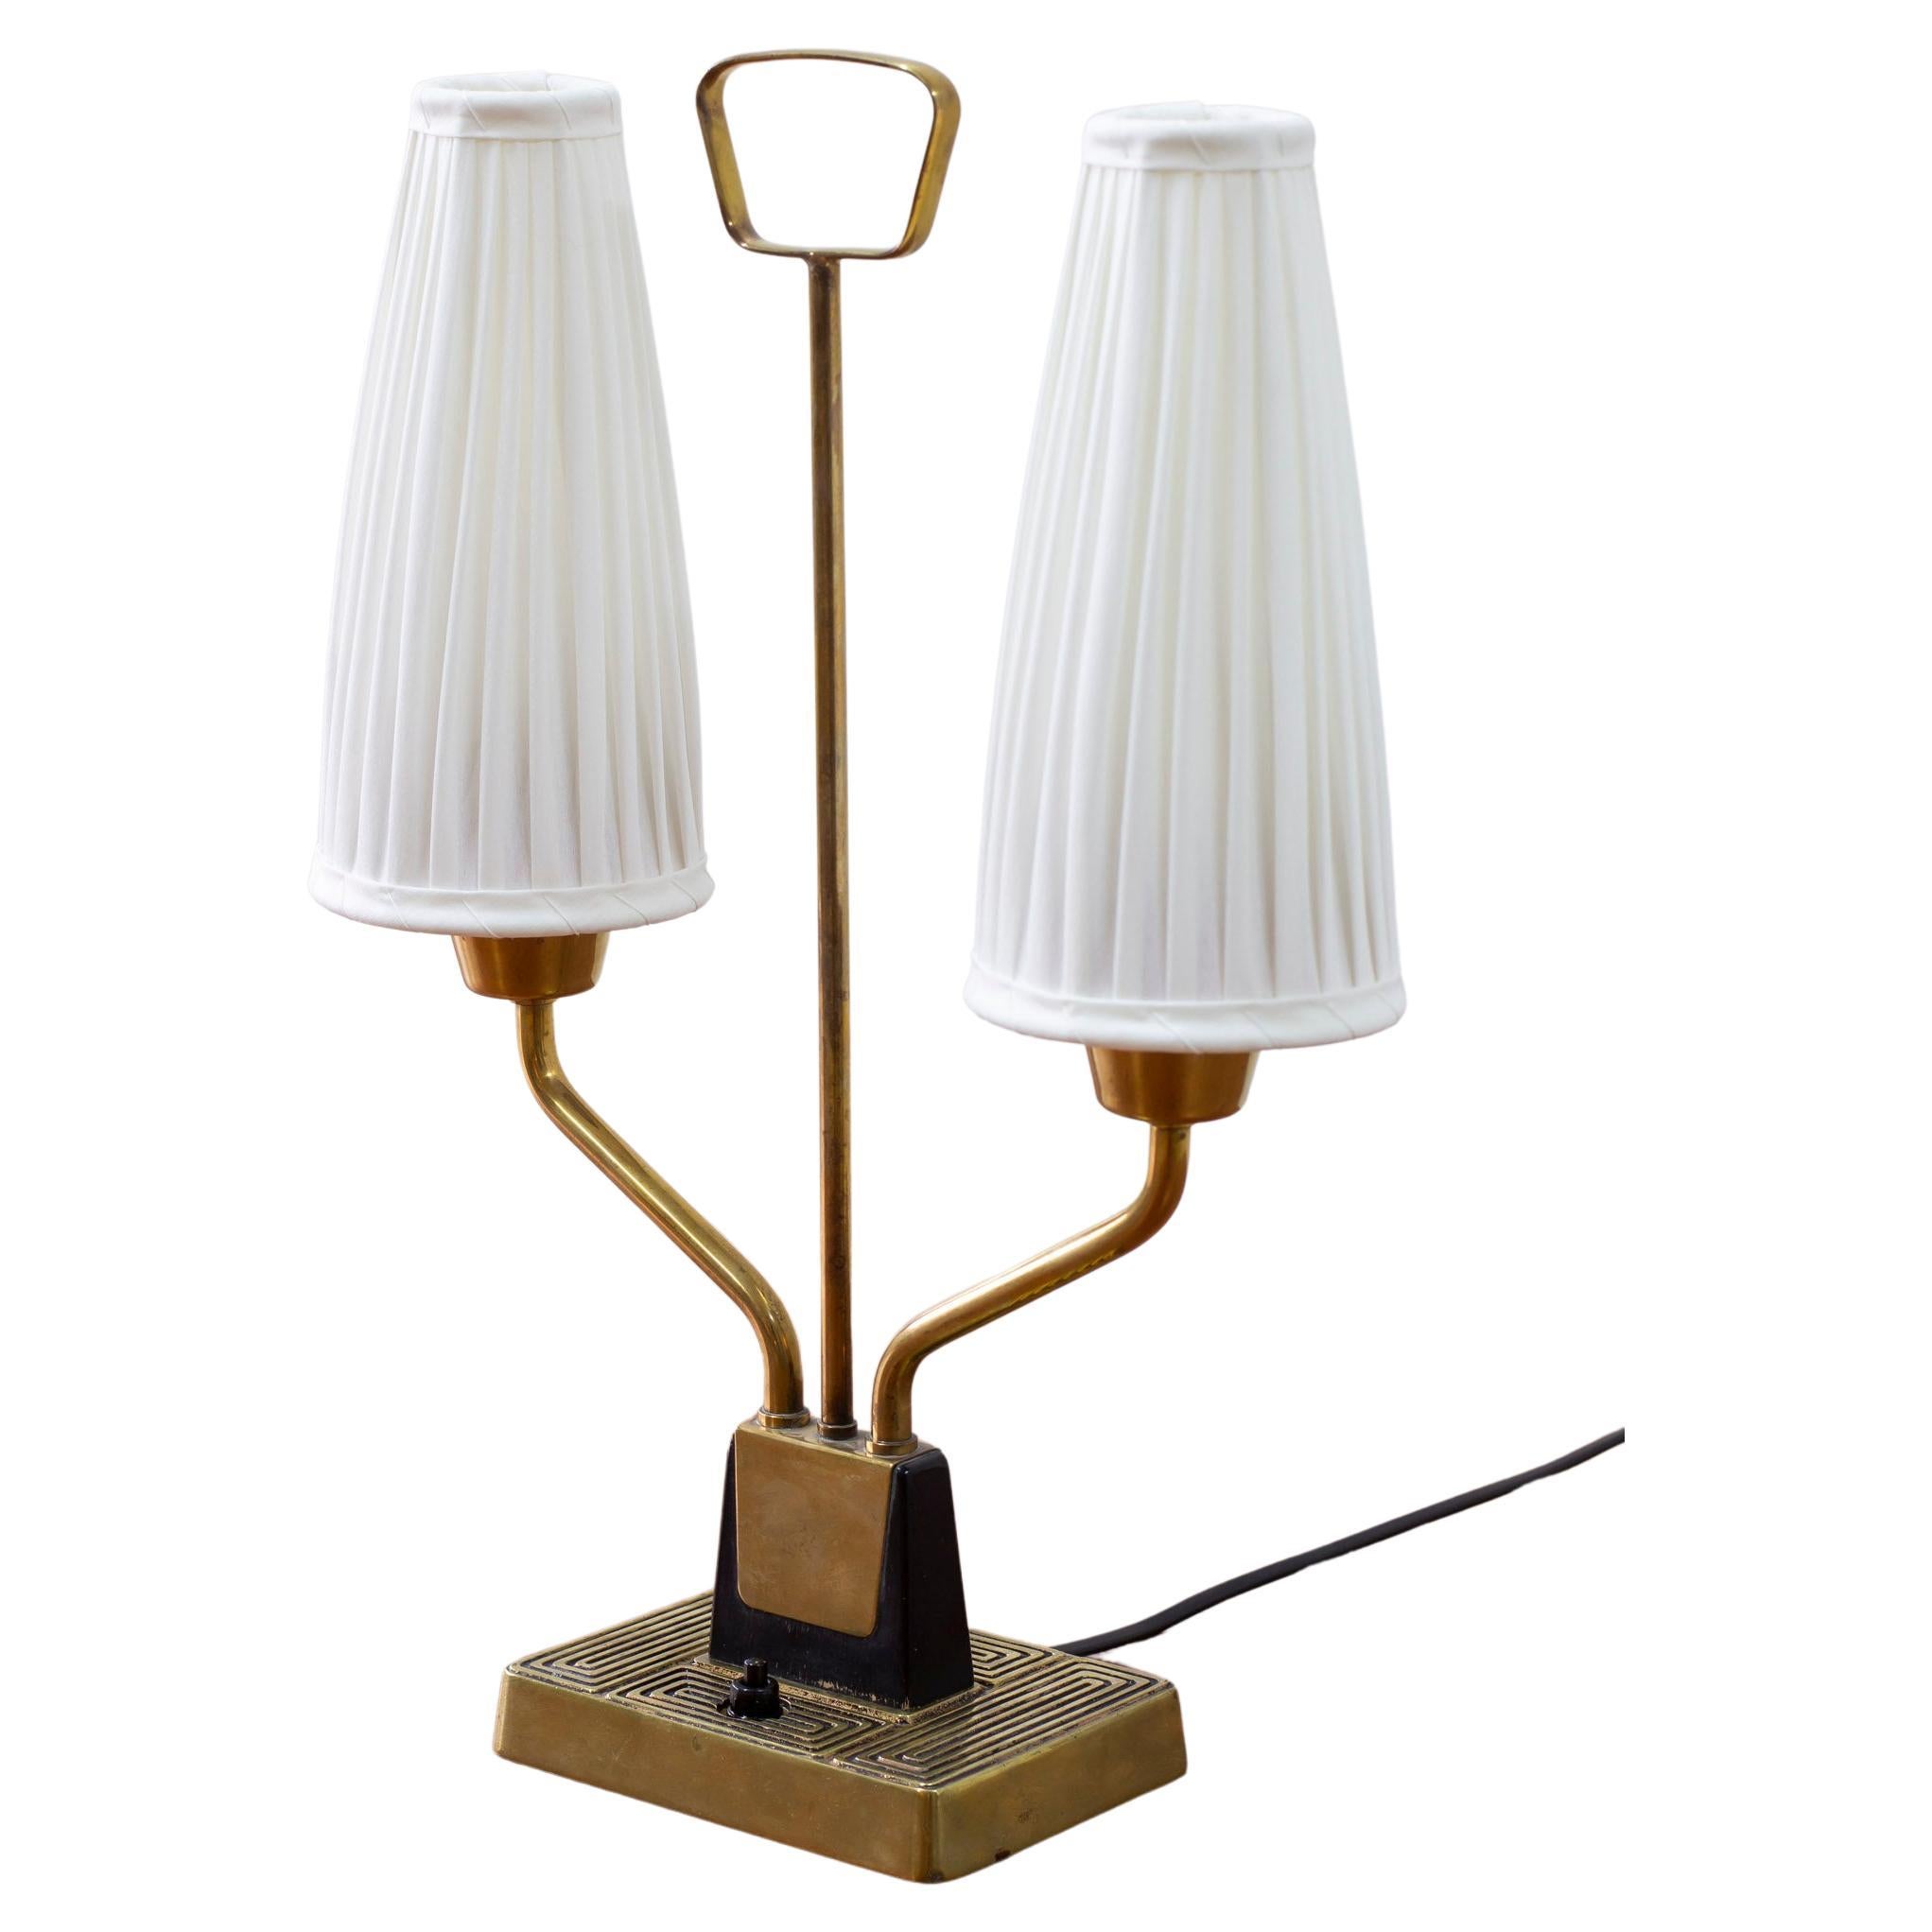 Brass table lamp by ASEA belysning, Sweden, 1950s For Sale